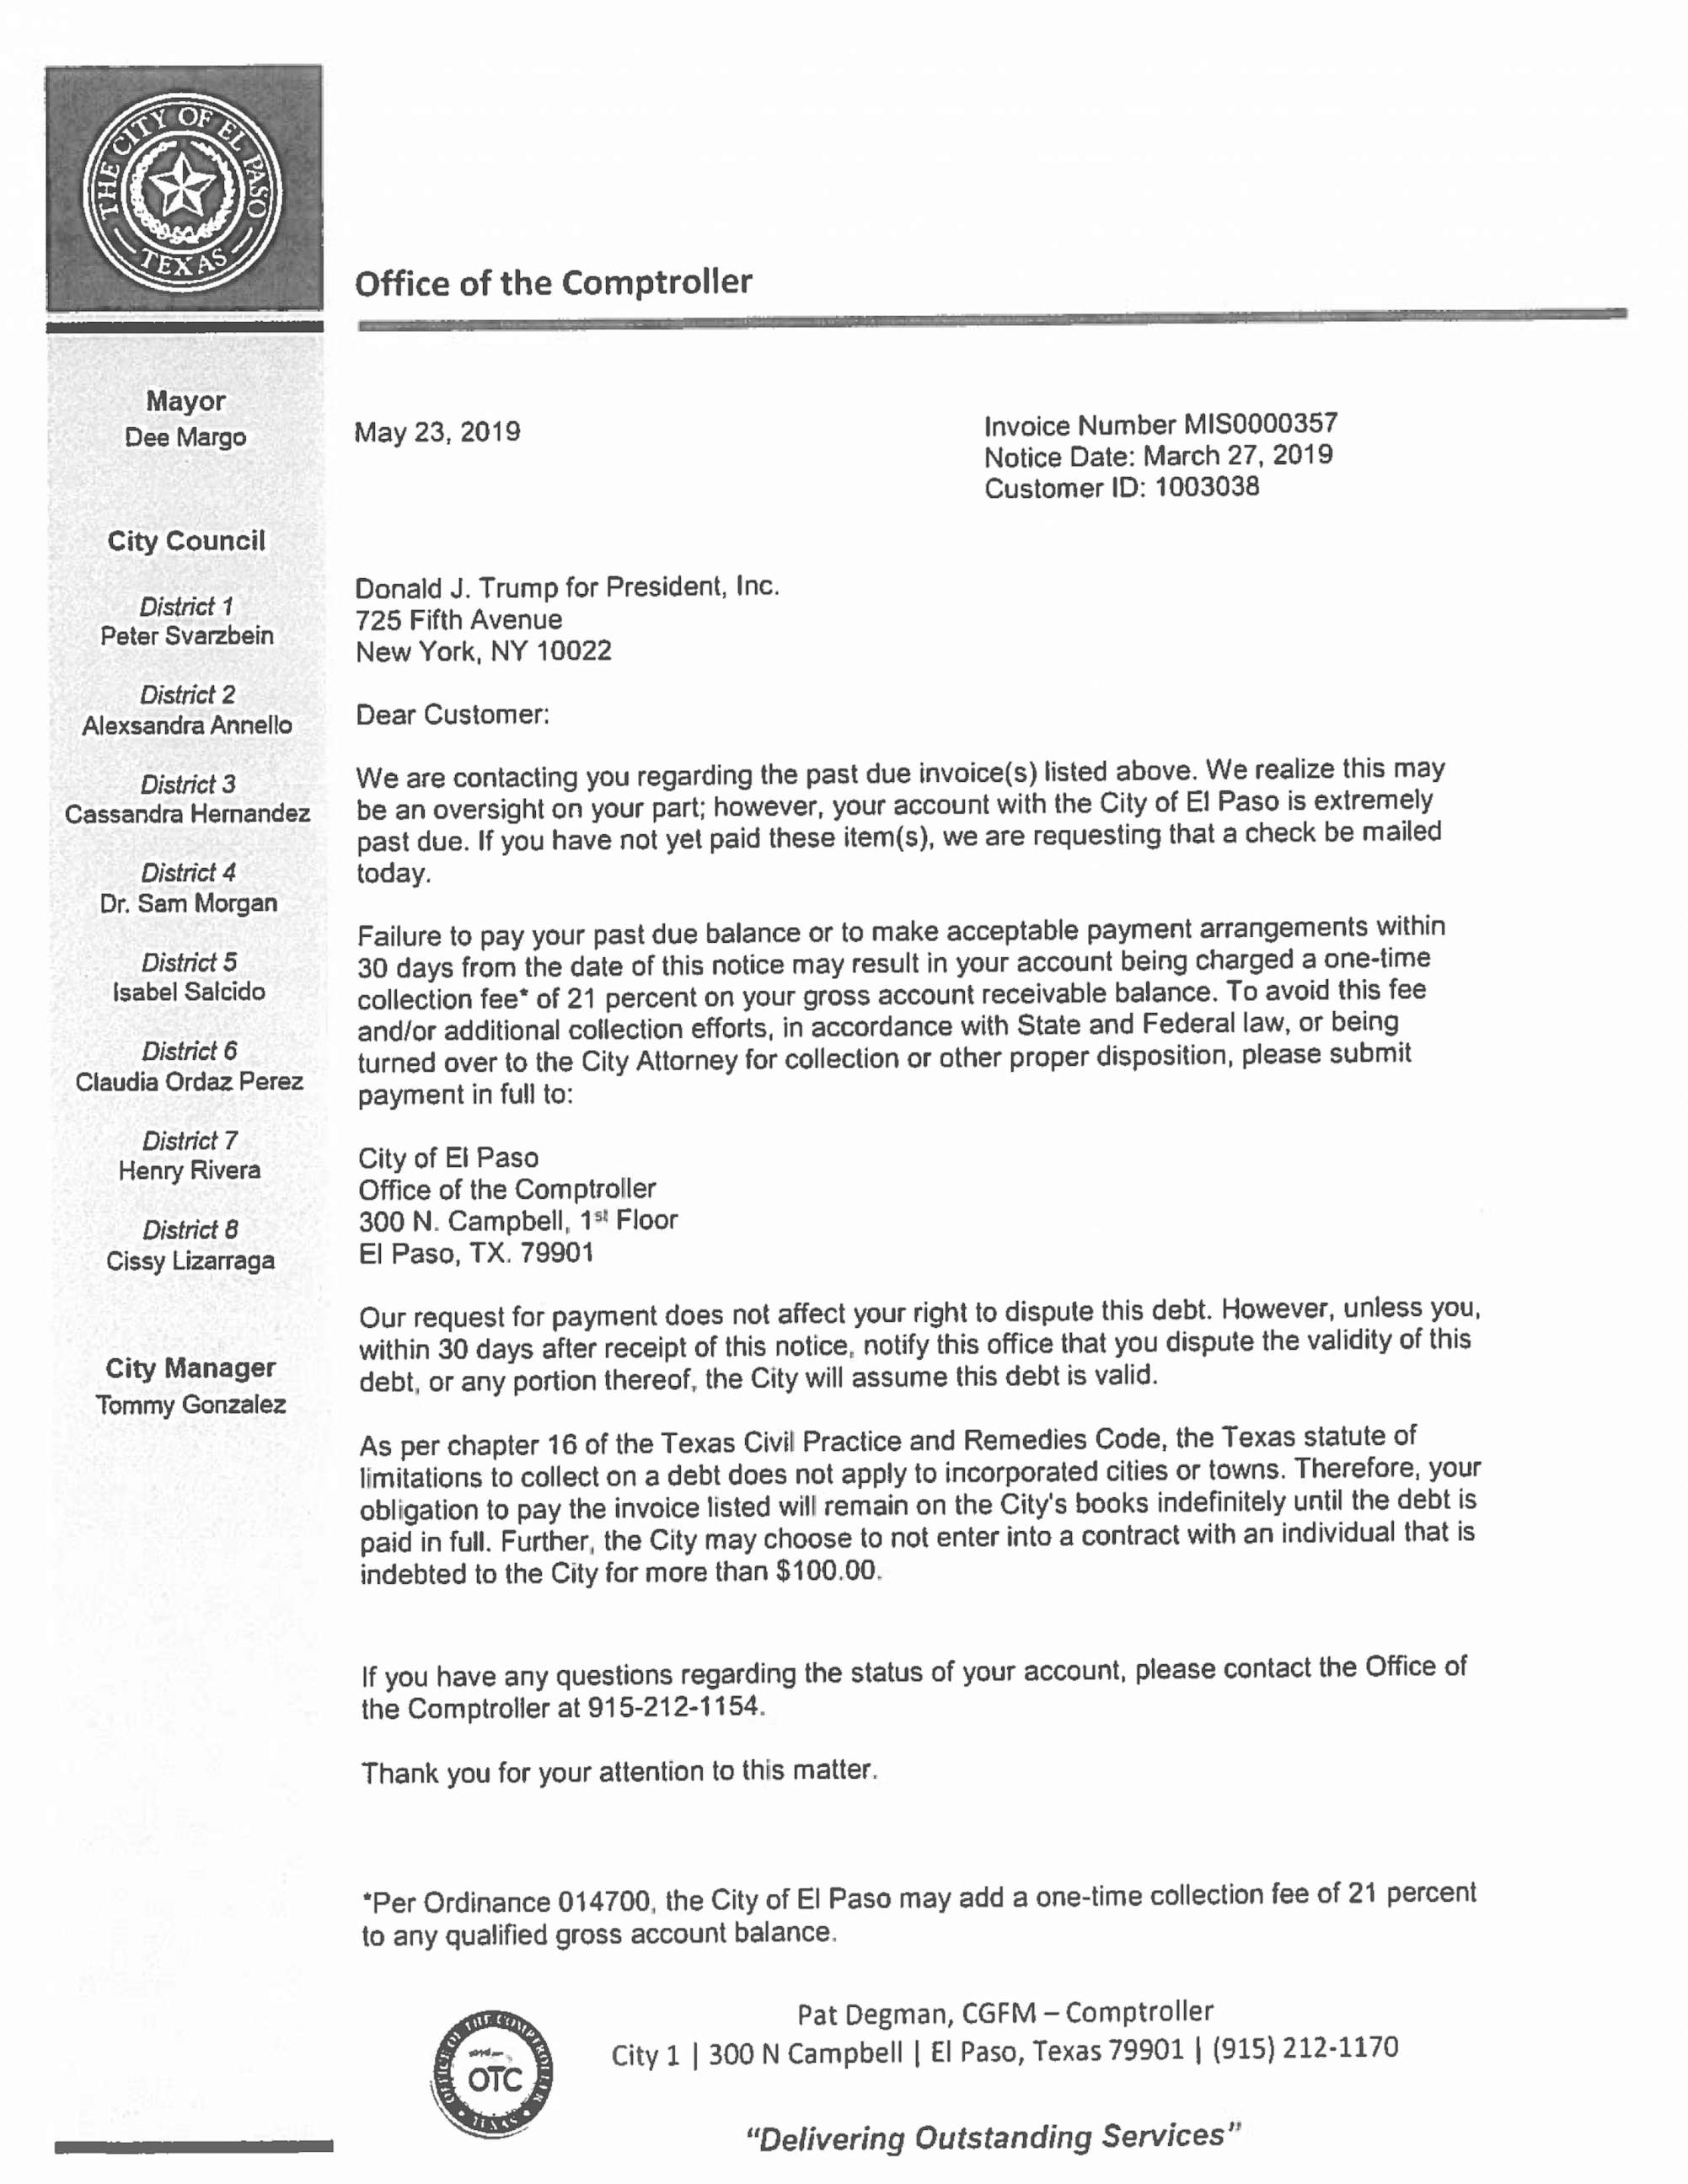 PHOTO: A letter from the Office of the Comptroller for the City of El Paso, Texas, dated May 23, 2019, addressed to Donald J. Trump for President, Inc., says, "your account with the city of El Paso is extremely past due."